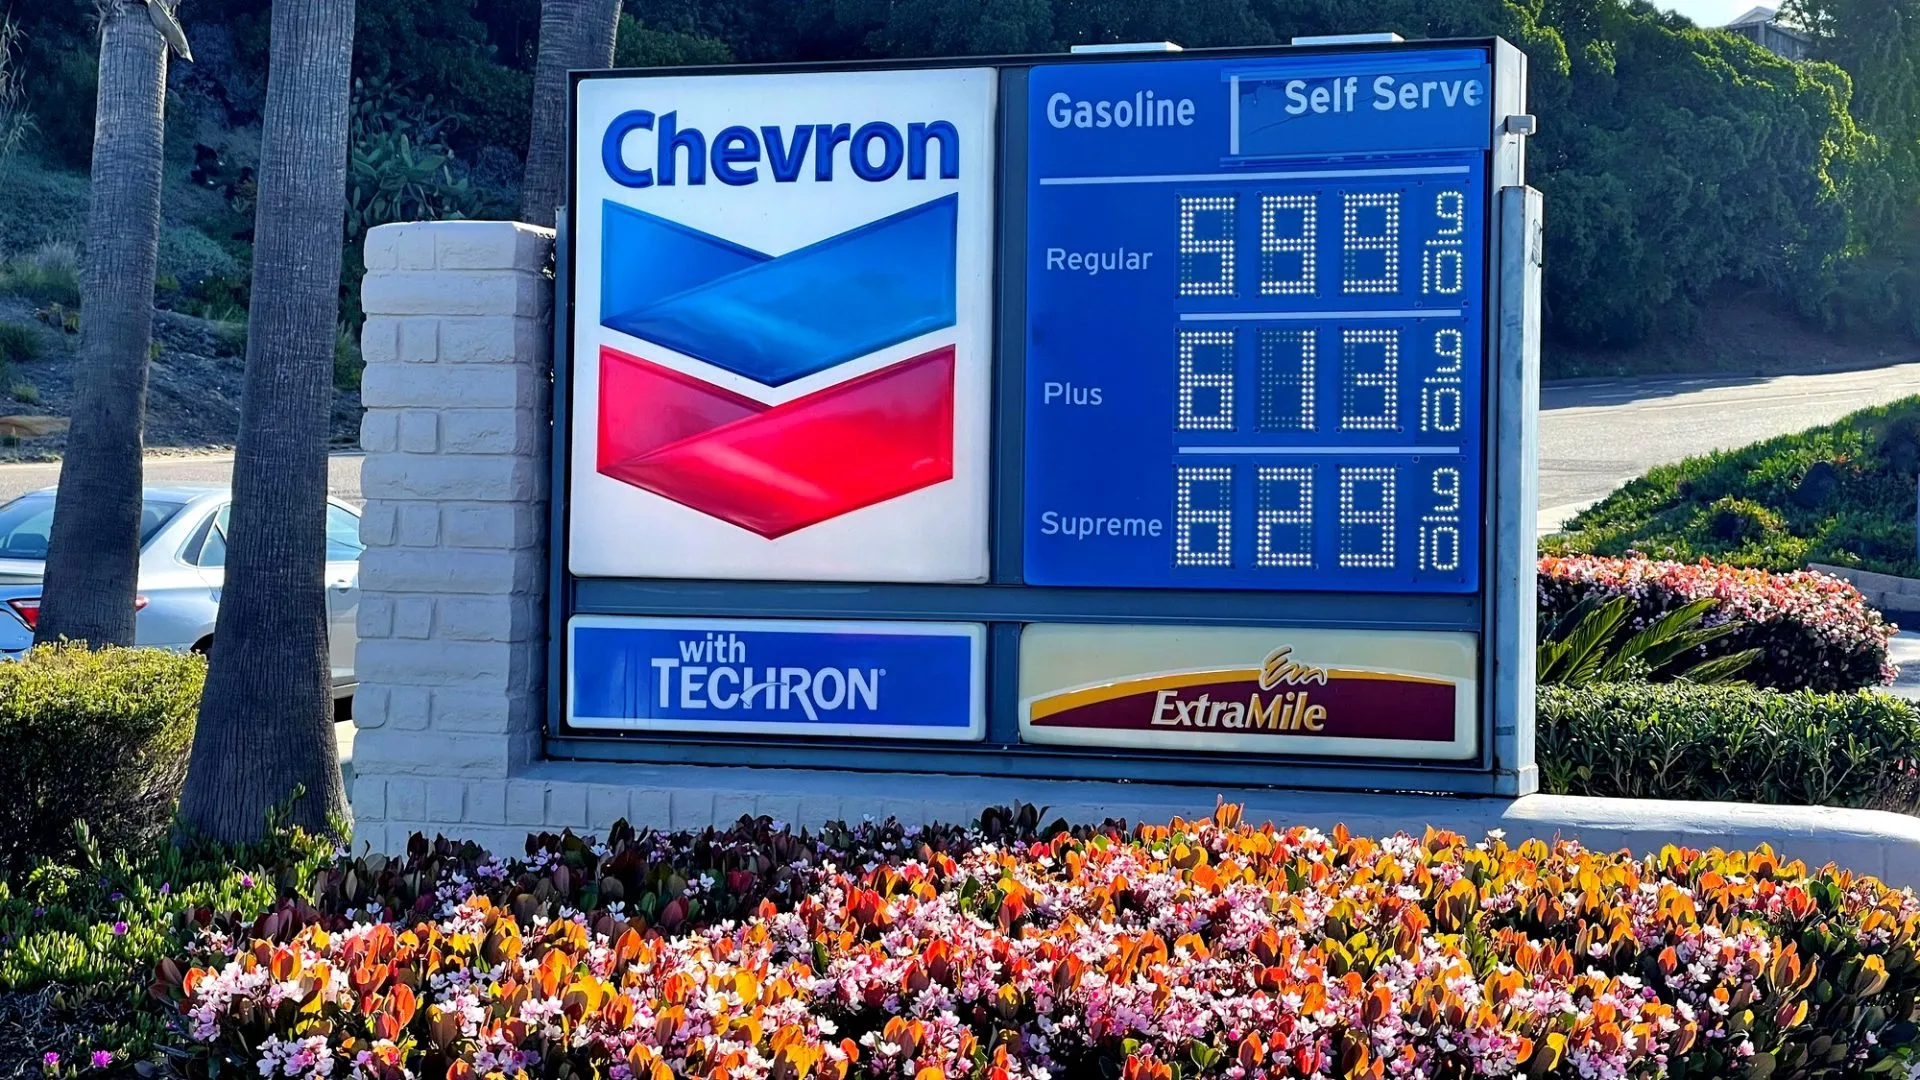 San Diego, California March 14th 2022: After rising dramatically following Russia's invasion of Ukraine, the price of gas reached a record, topping a high that had stood for nearly 14 years.